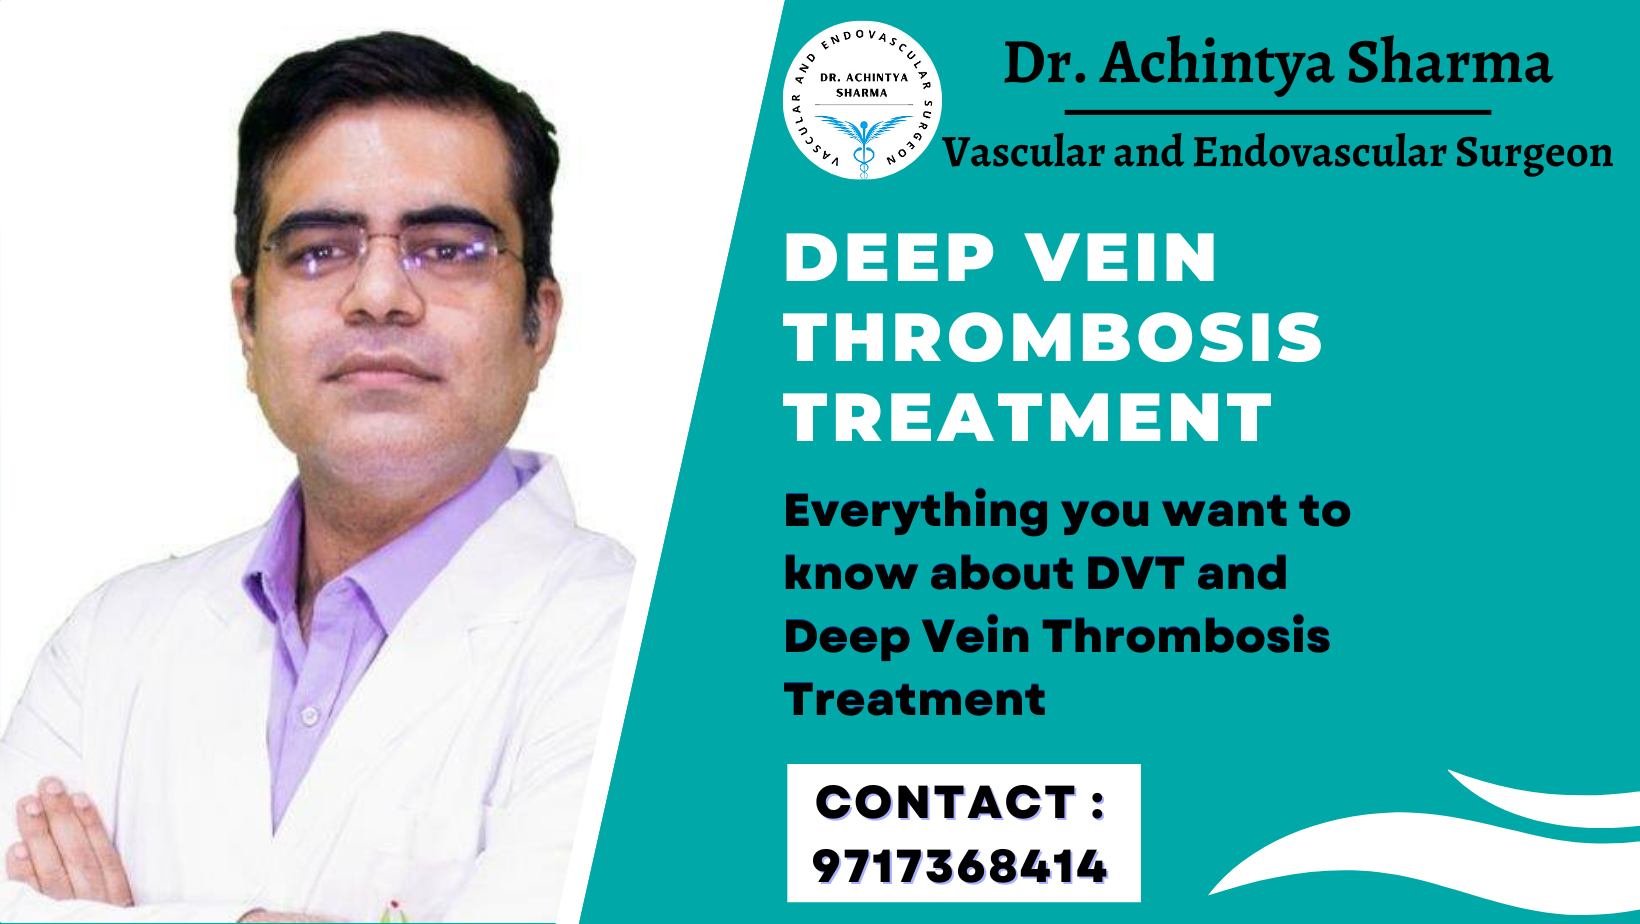 <strong>Everything you want to know about DVT and Deep Vein Thrombosis Treatment</strong>